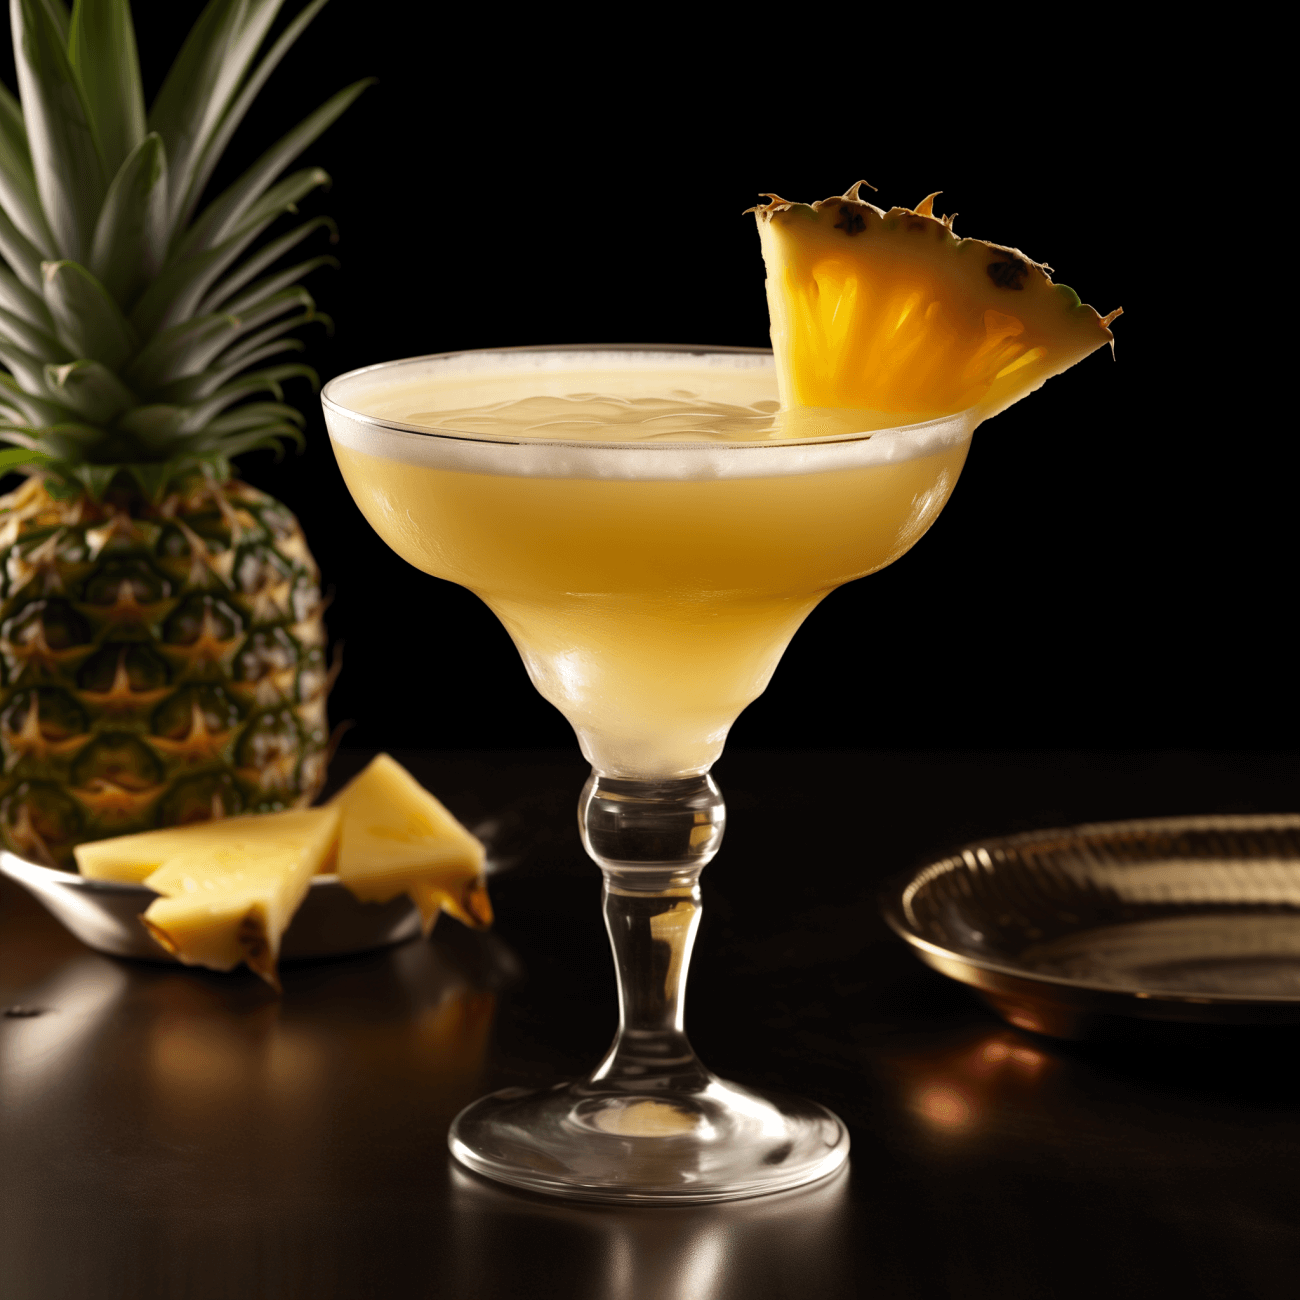 Maverick Cocktail Recipe - The Maverick cocktail is a harmonious blend of sweet, sour, and strong flavors. The vodka provides a strong, clear base, while the triple sec and amaretto add a sweet, citrusy and nutty twist. The pineapple juice adds a tropical tang, and the galliano herbal liqueur gives it a unique herbal undertone.